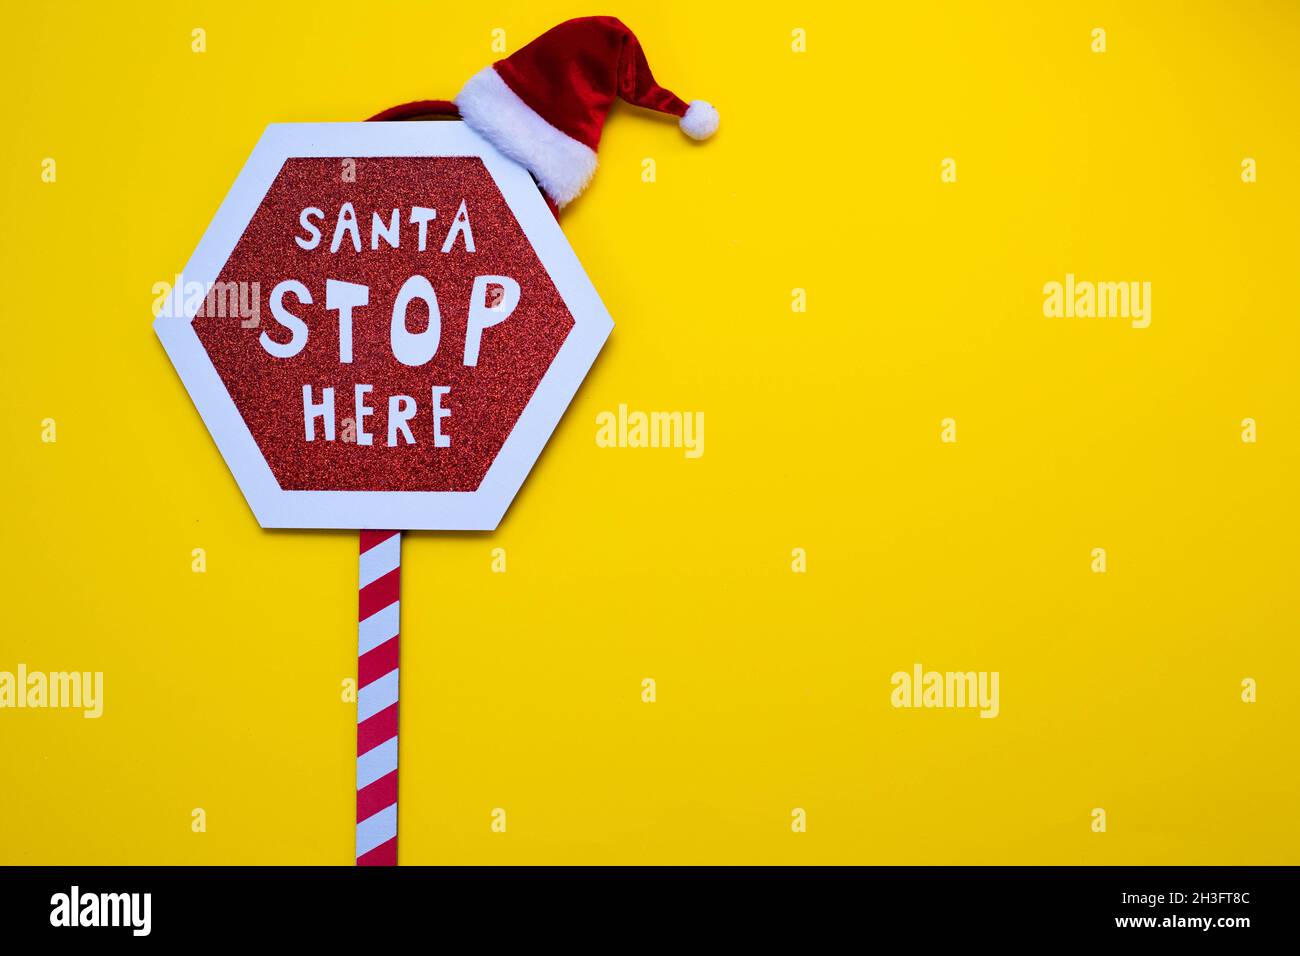 Realistic wooden Christmas Red stop sign with text Santa Stop Here Stock  Photo - Alamy